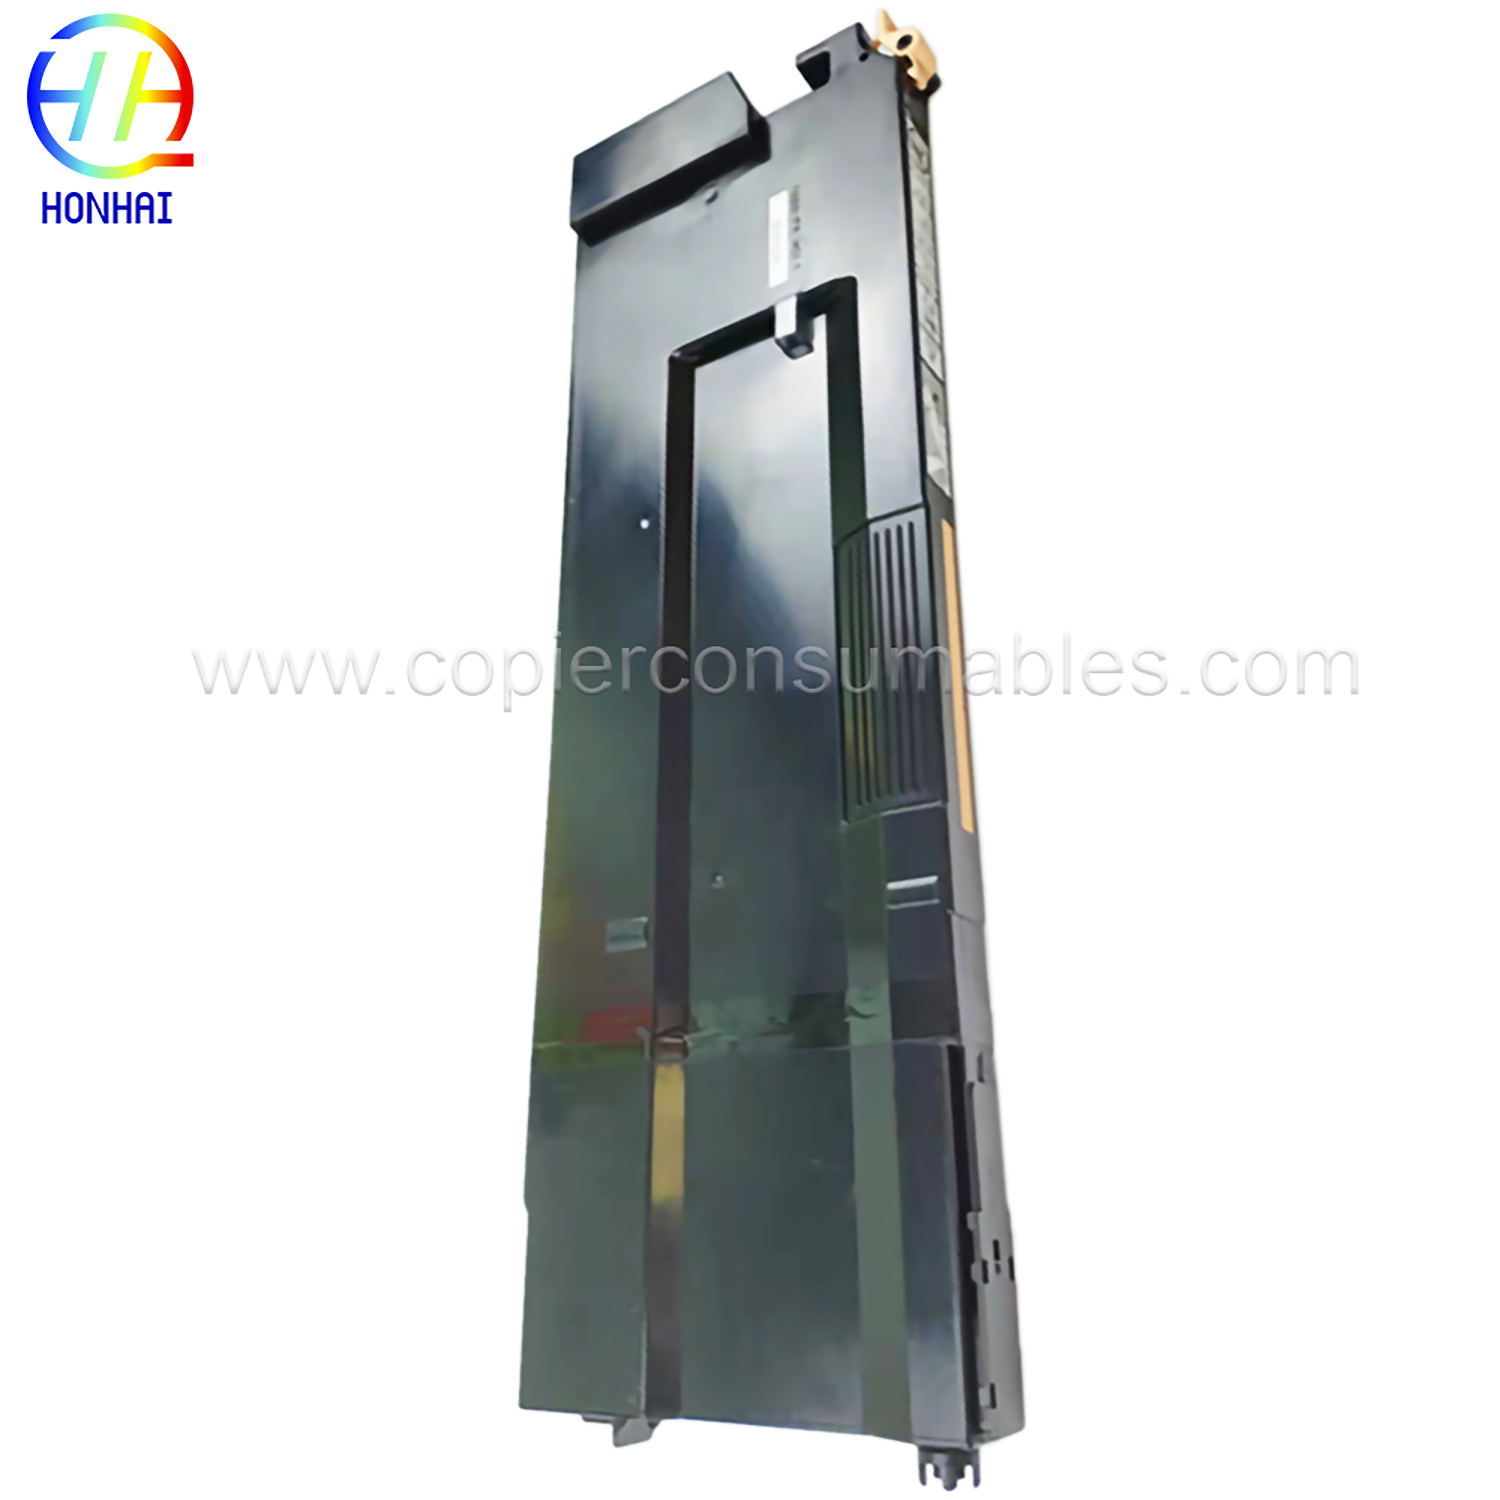 Waste Tone Container Compatible for Xerox 4110 4127 4590 4595 D110 D125 D136 D95 ED125 ED95A 008R13036 (5) 拷贝